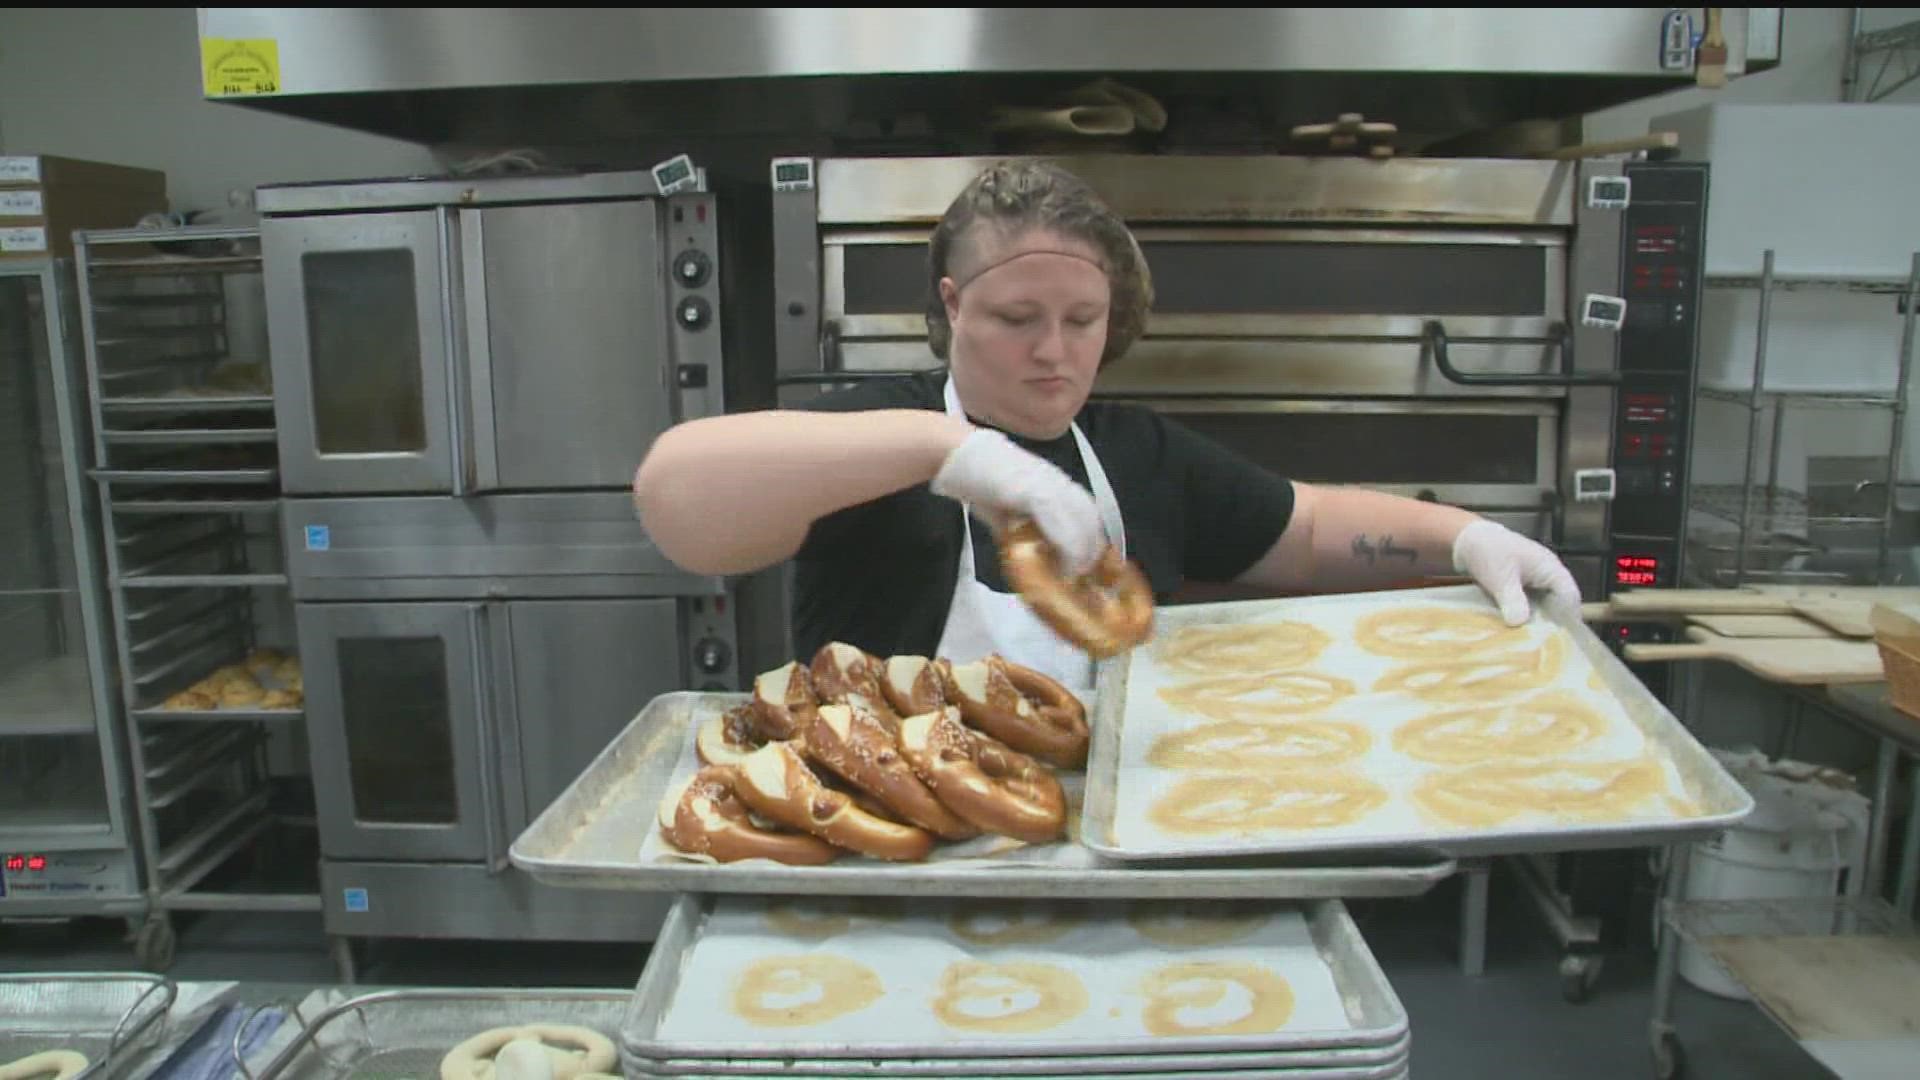 Staffing shortages are blamed for the temporary shuttering of the popular Minneapolis bakery.